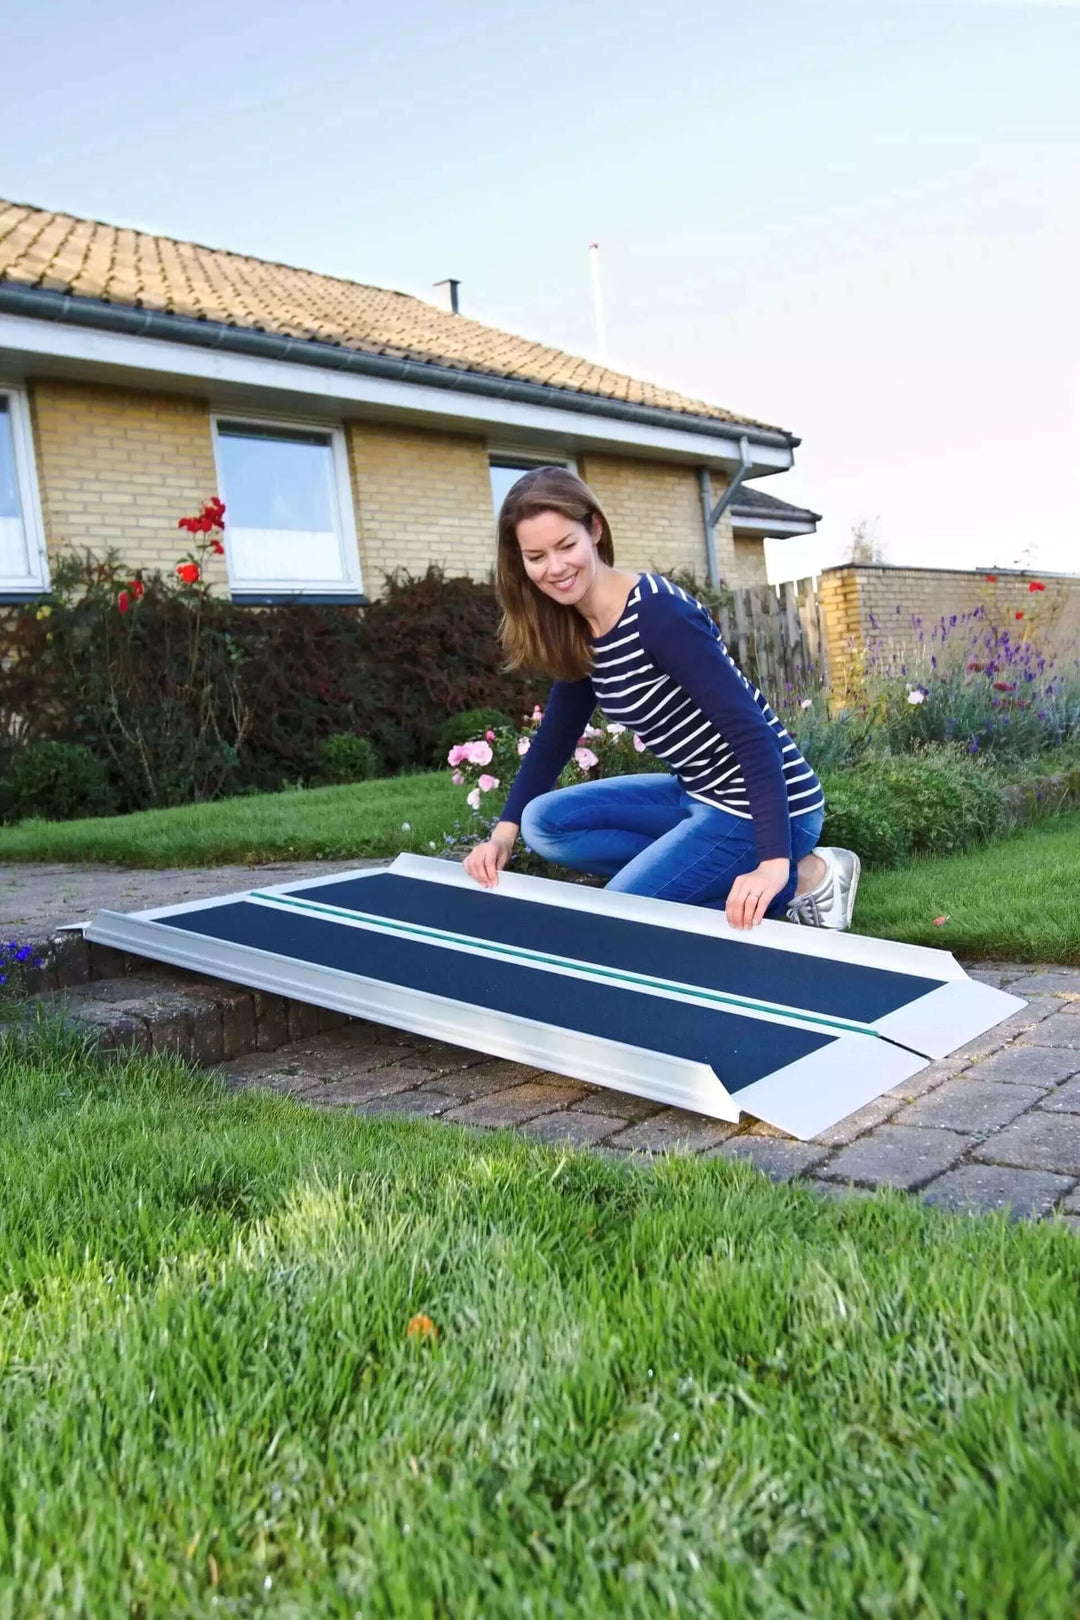 Guldmann - Stepless EasyFold Pro Portable Wheelchair Ramp being laid down by lady to use over curb